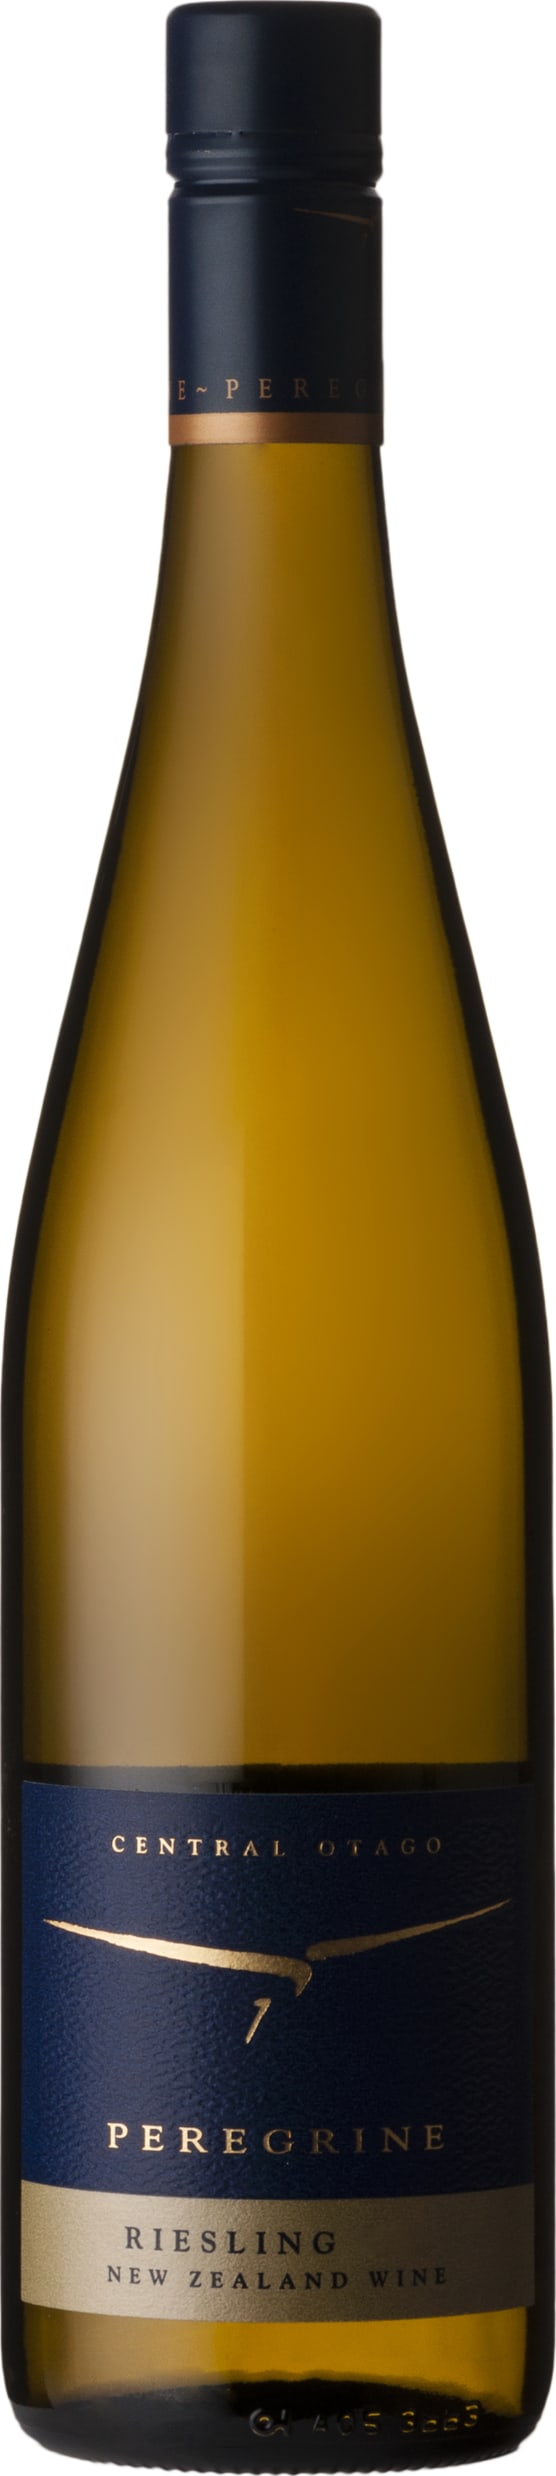 Peregrine Wines Riesling 2021 75cl - Buy Peregrine Wines Wines from GREAT WINES DIRECT wine shop